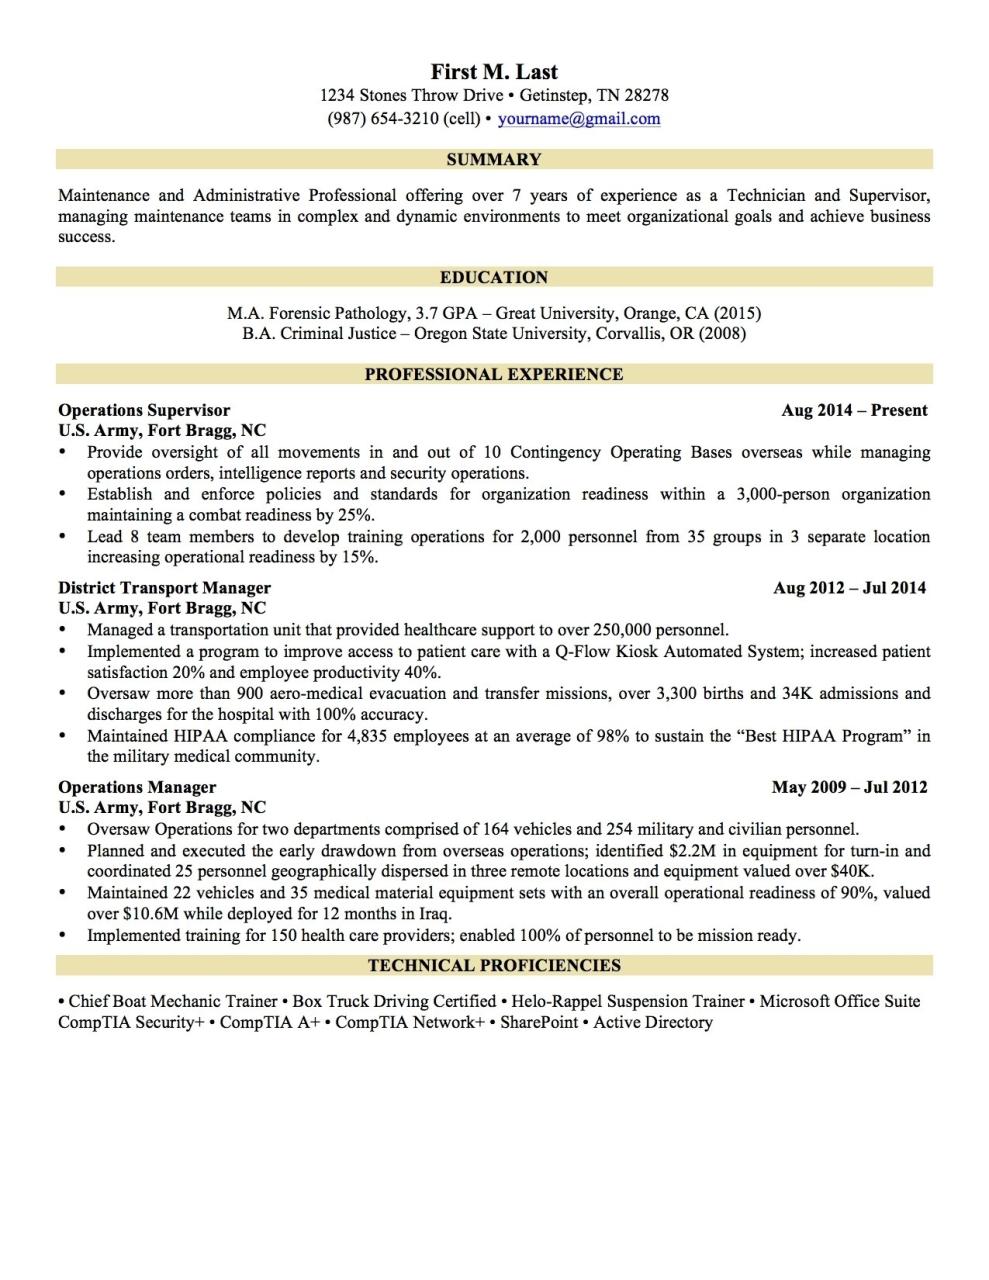 14 Professional Summary for Resume No Work Experience Samples Resume